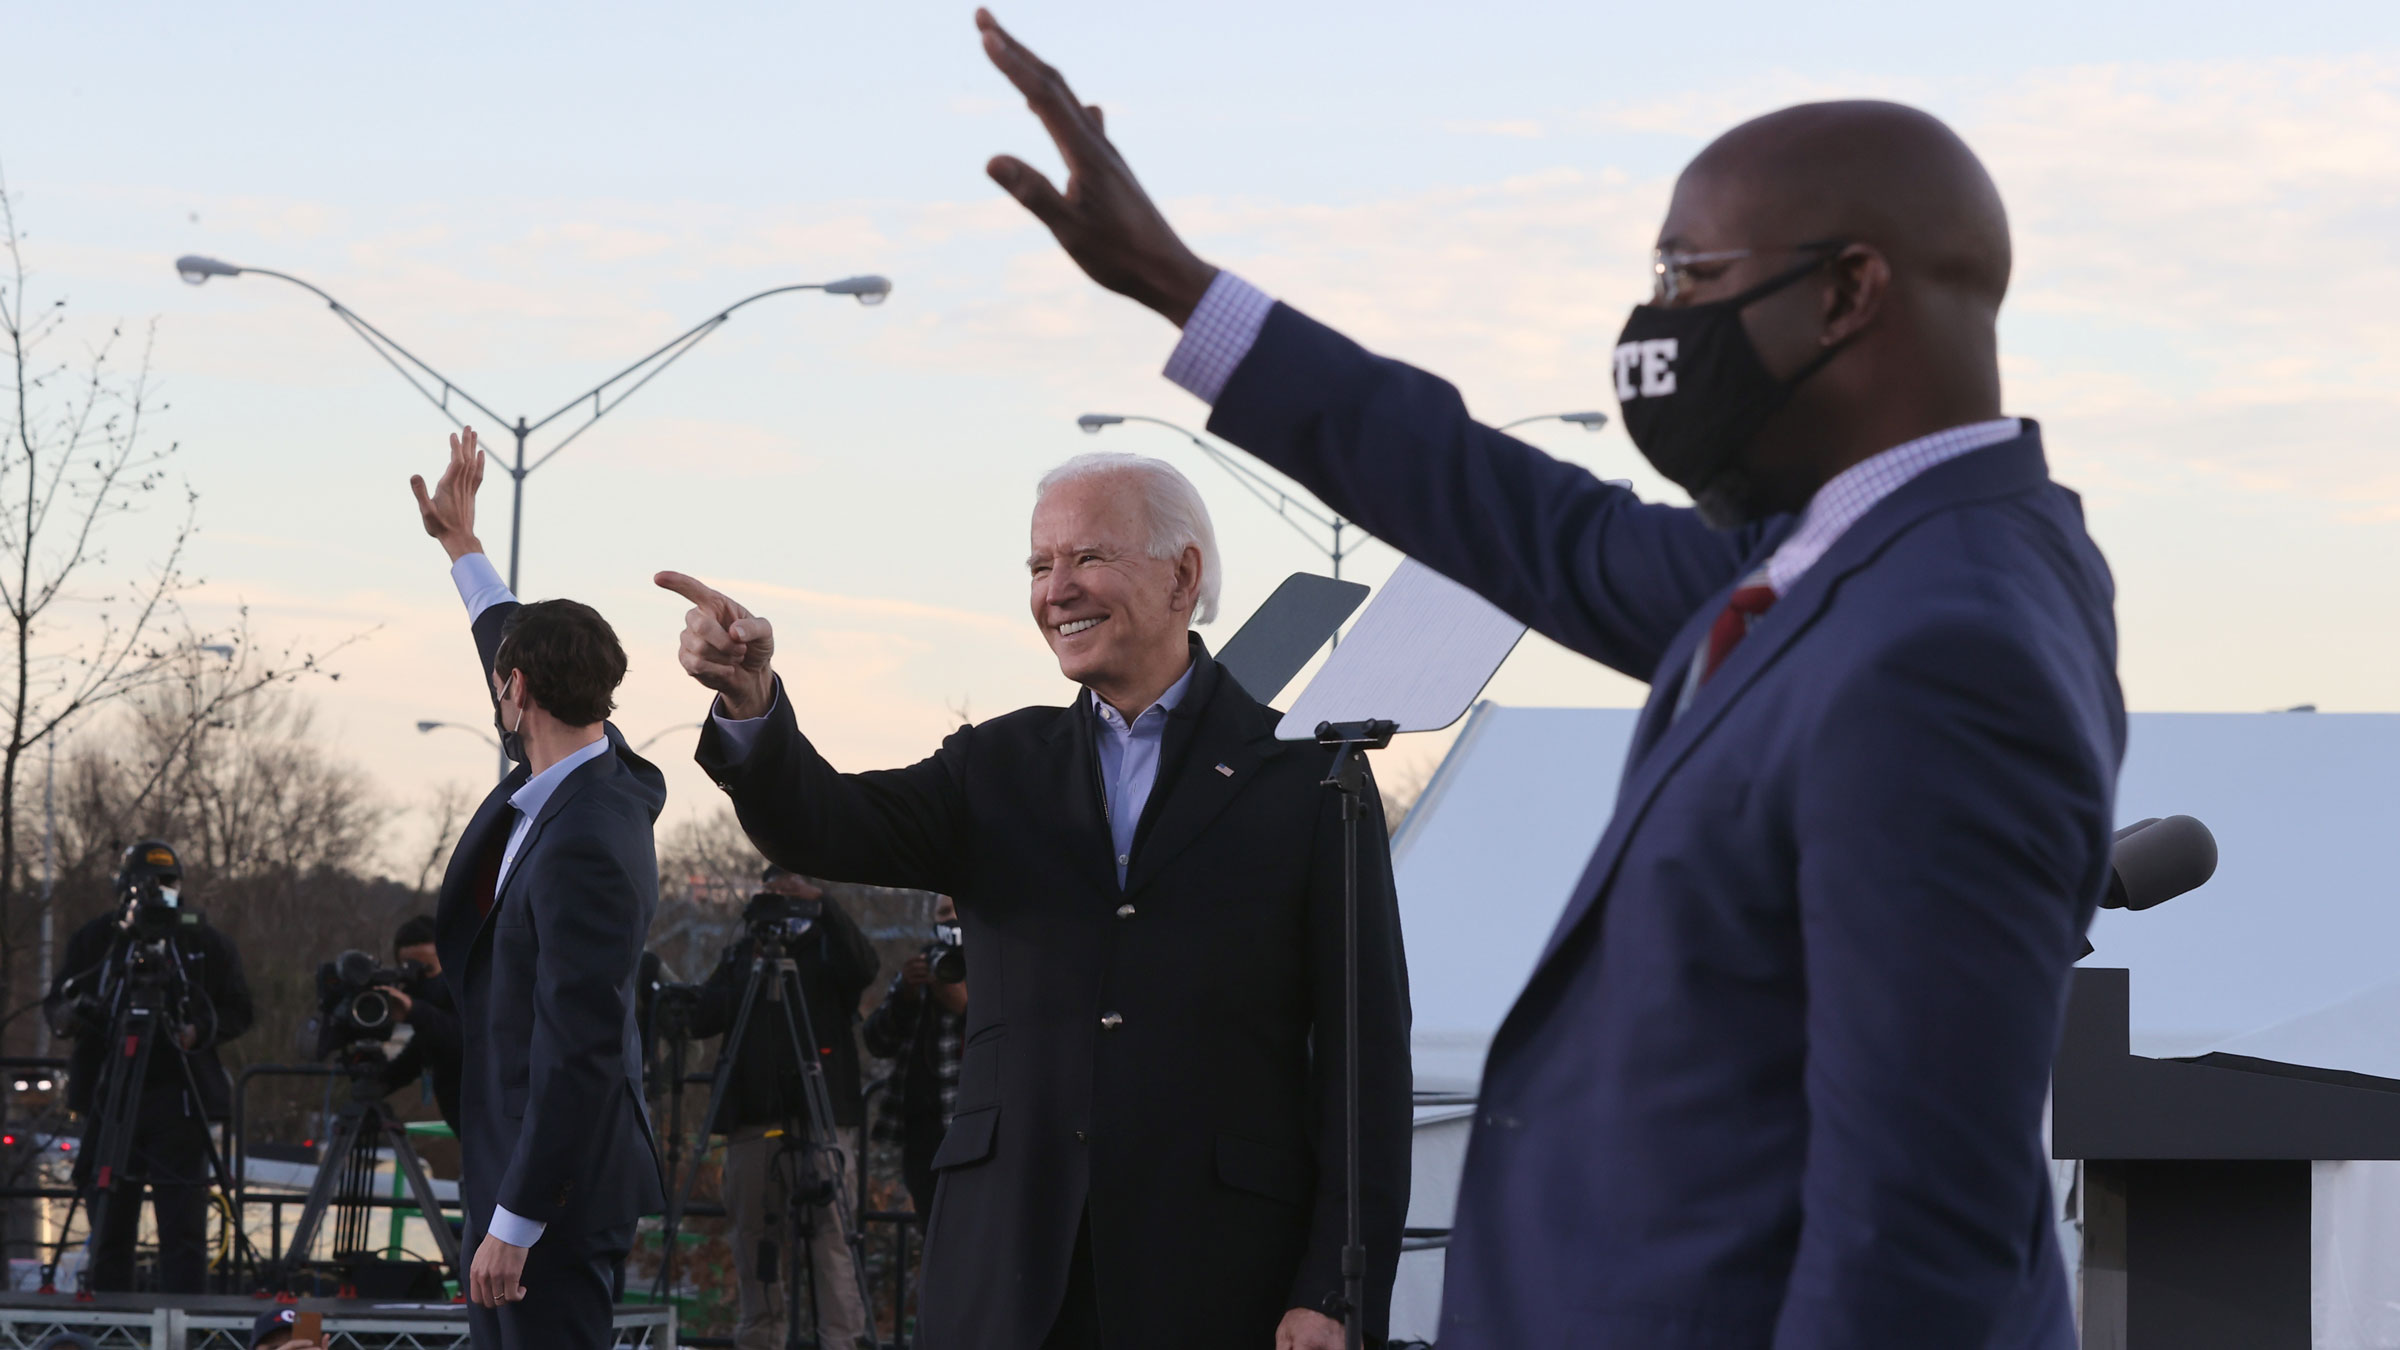 President-elect Joe Biden, center, is joined by Senate candidates Jon Ossoff, left, and Raphael Warnock during a campaign rally in Atlanta on Monday.